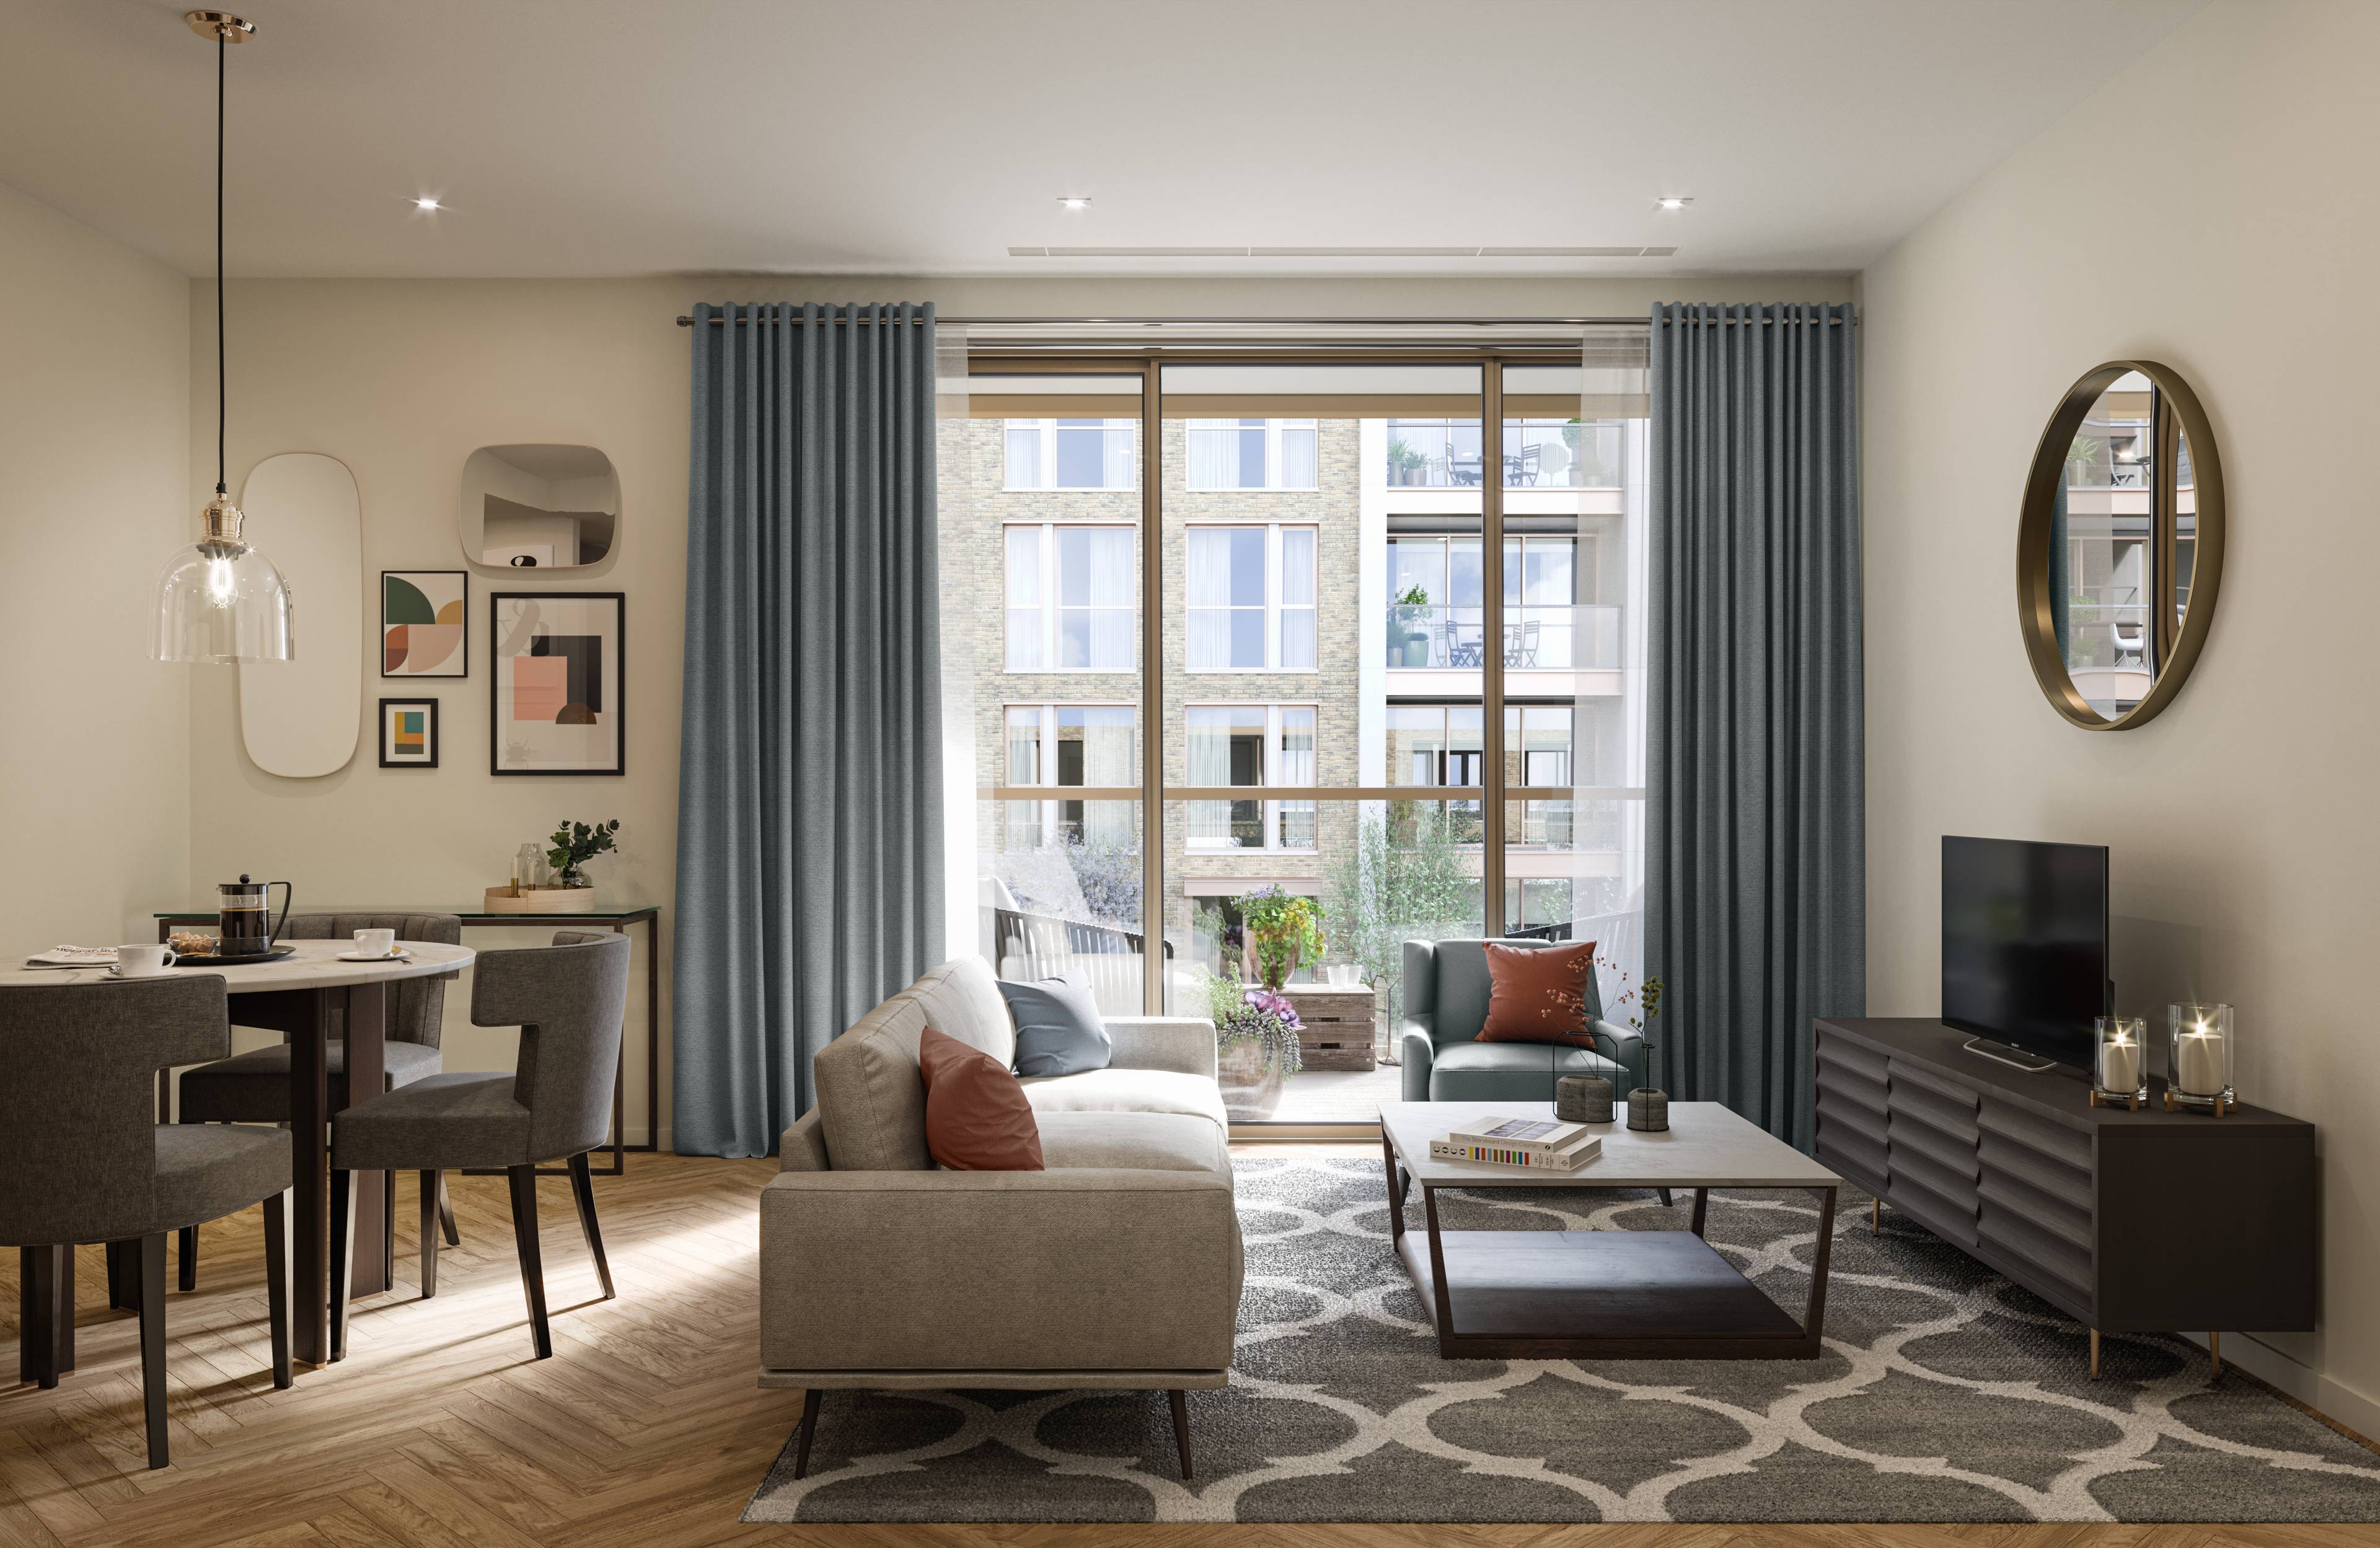 Out of one of our favorite floor plans we introduce this great 3-bed from King’s Road Park's stylish collection of apartments set within six acres of beautiful landscaping including a public park, square and residents’ garden.